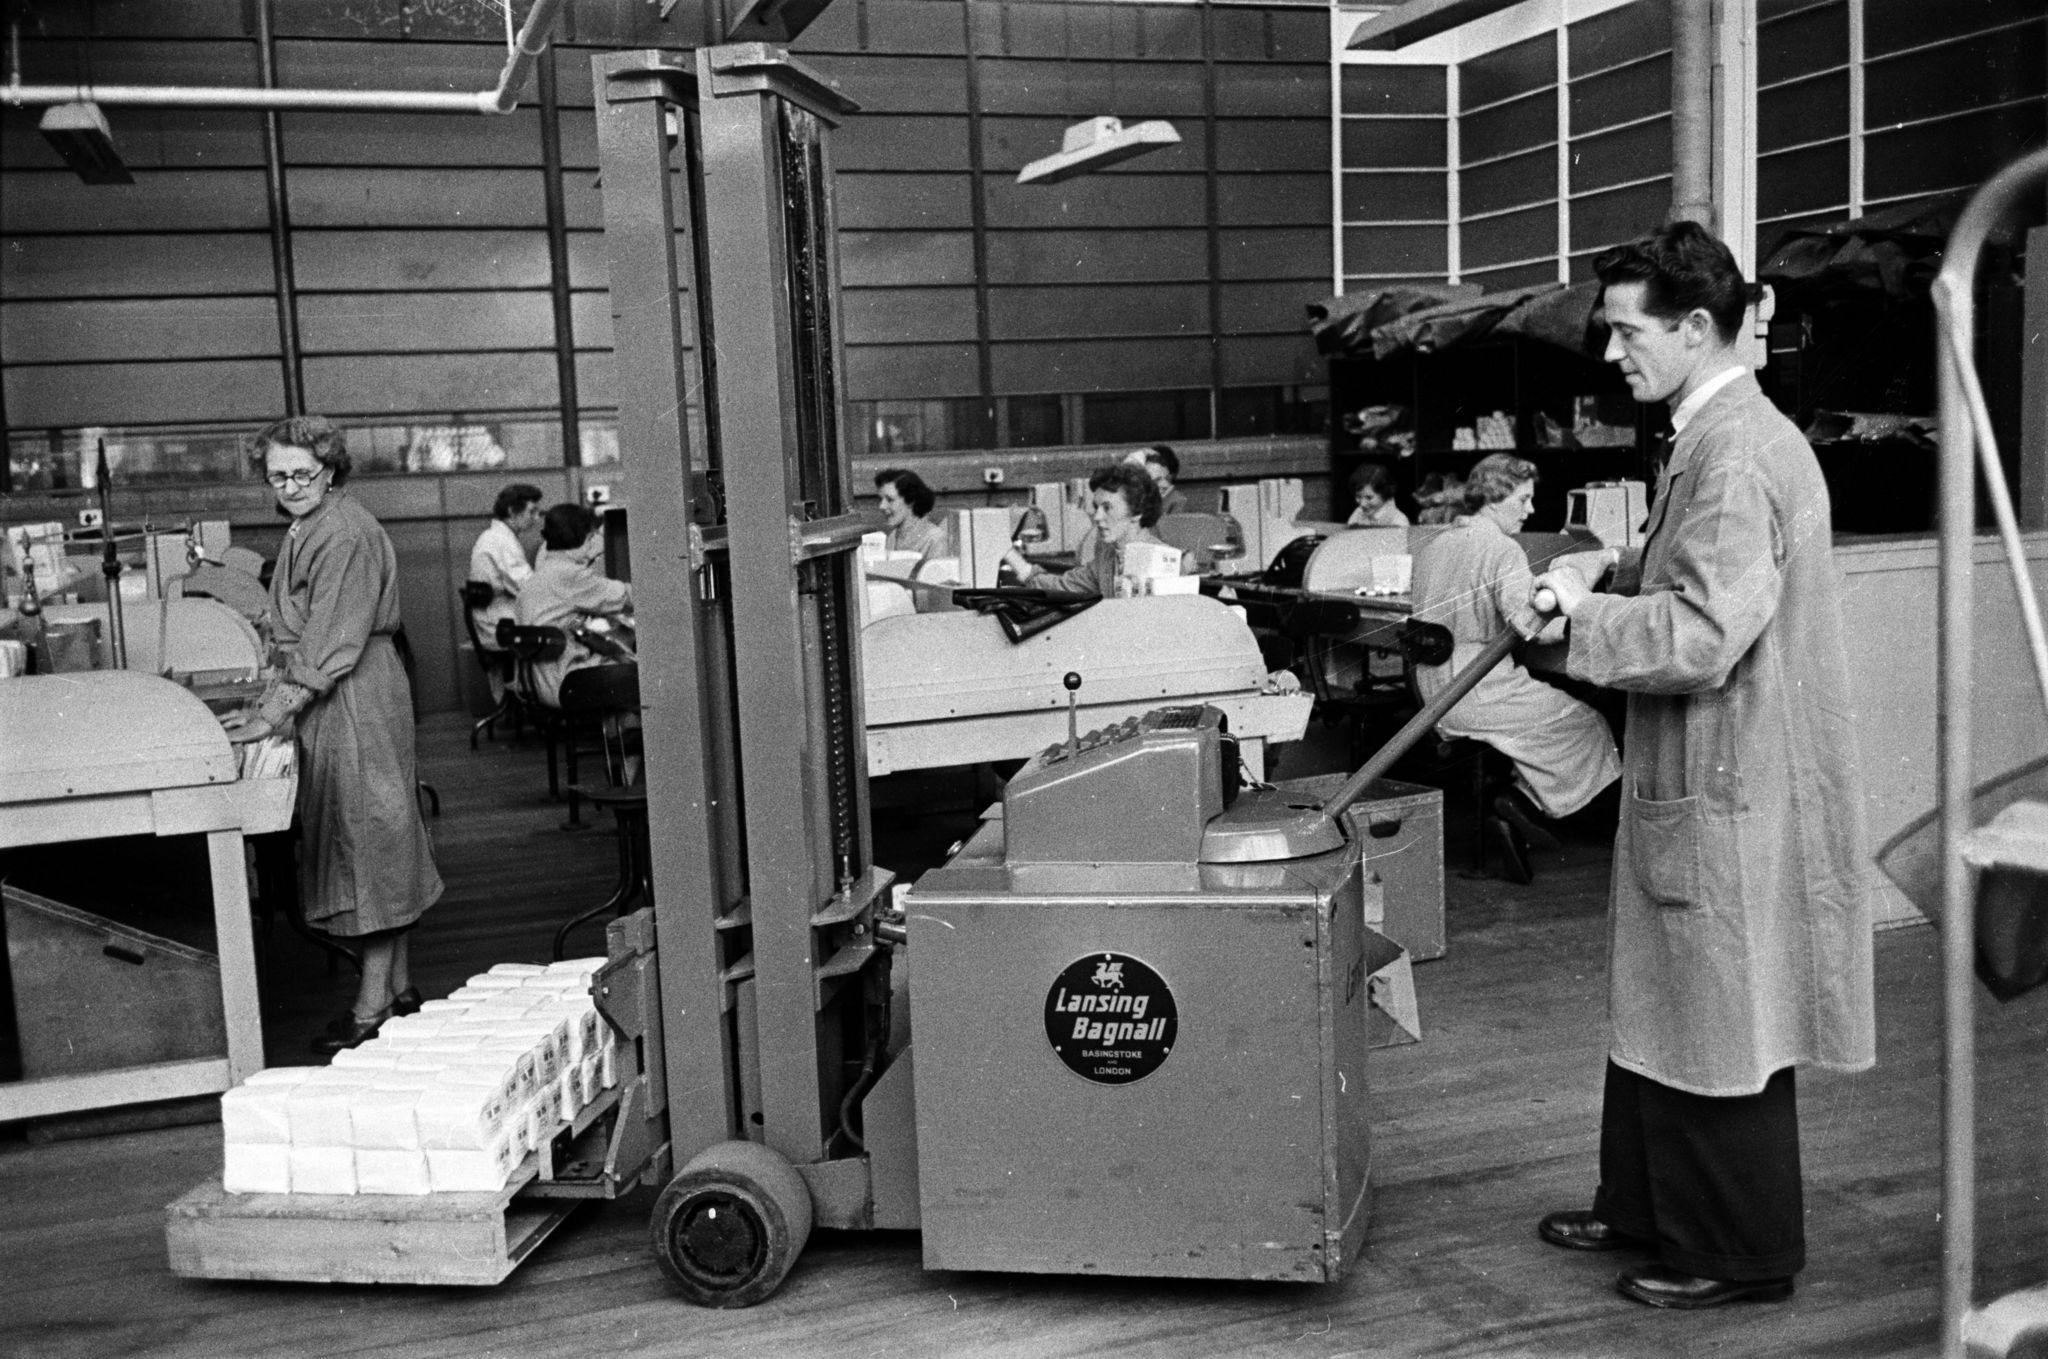 20th August 1955: A worker transports cartons of Three Nuns tobacco using a forklift vehicle at a factory in Glasgow. The tobacco industry in Glasgow dates back to the eighteenth century but it collapsed in the 1770s when the American War of Independence ruined the city's 'Tobacco Lords'. It was gradually rebuilt and local firm Stephen Mitchell & Son still operates from Alexander Parade which is the oldest foundation of the tobacco trade, dating back to 1723. Original Publication: Picture Post - 7942 - Let Glasgow Flourish! - pub. 1955 (Photo by Haywood Magee/Picture Post/Hulton Archive/Getty Images)